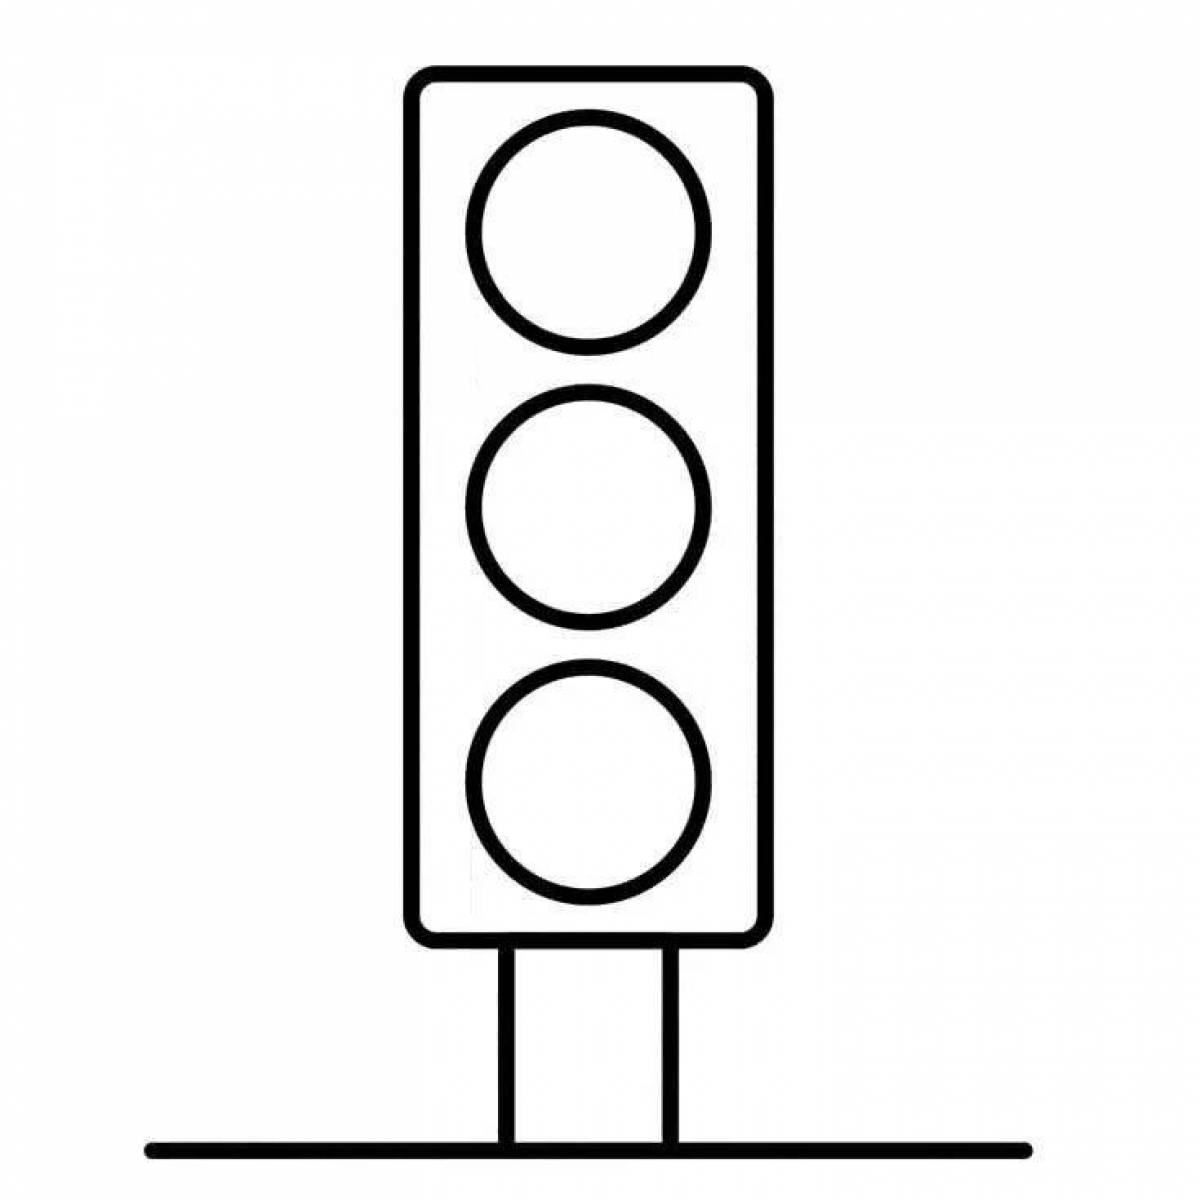 Coloring pages of traffic lights for children 2-3 years old